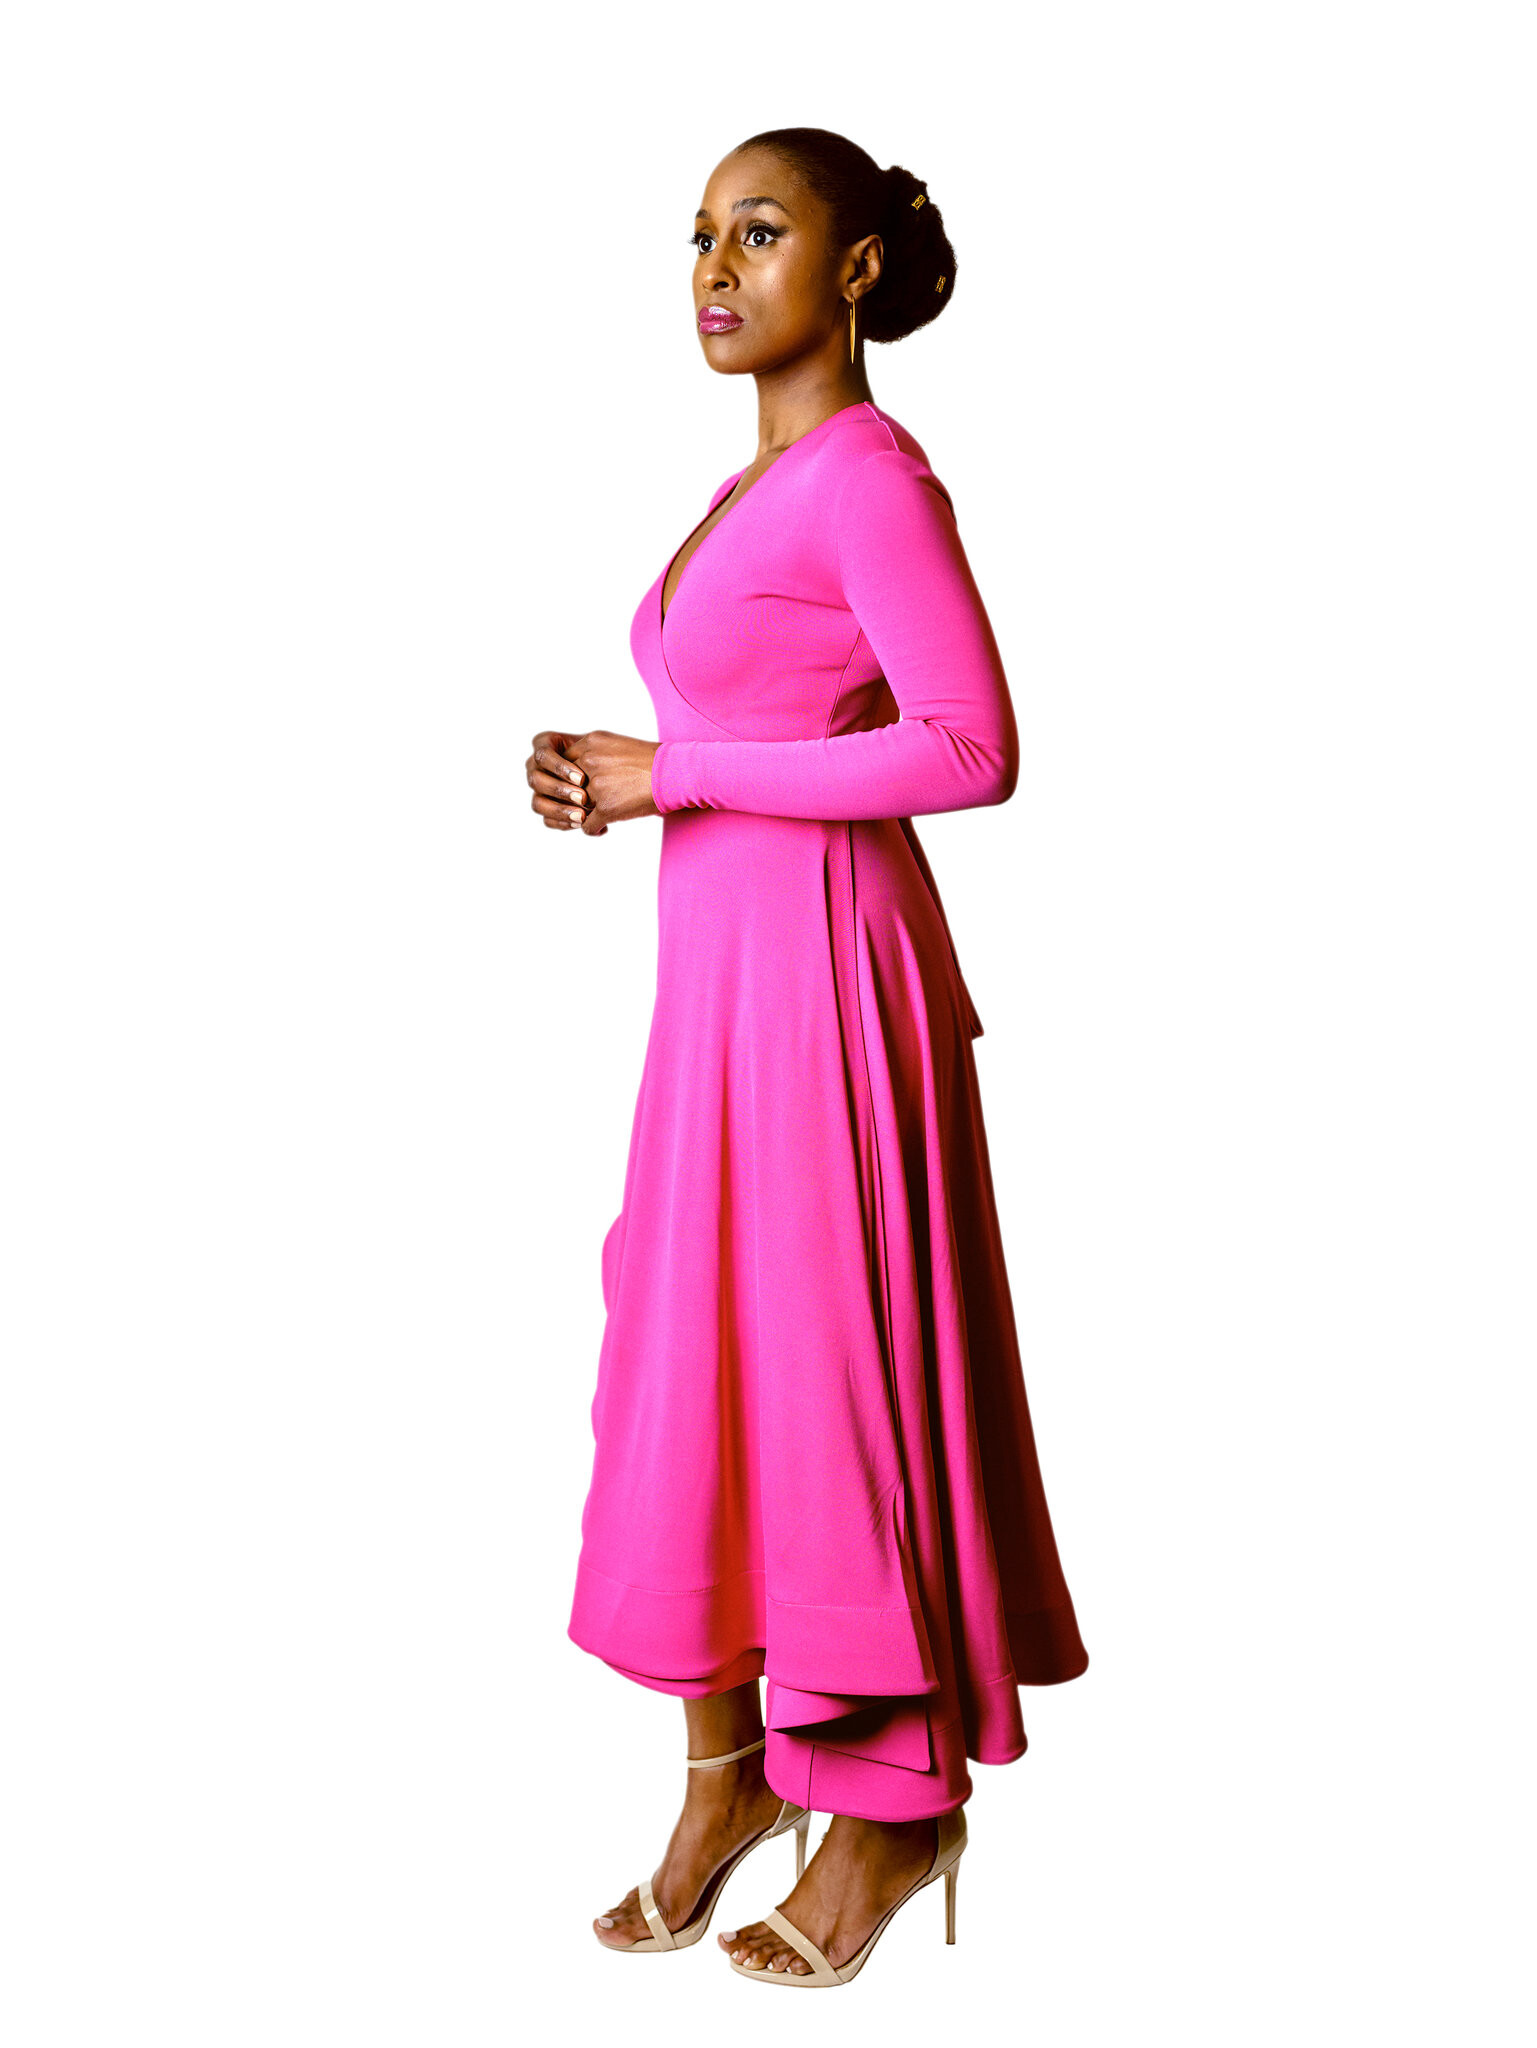 Issa Rae: Nominee for 2021 Primetime Emmy Awards for the role of Issa Dee in television series Insecure. 1540x2050 HD Background.